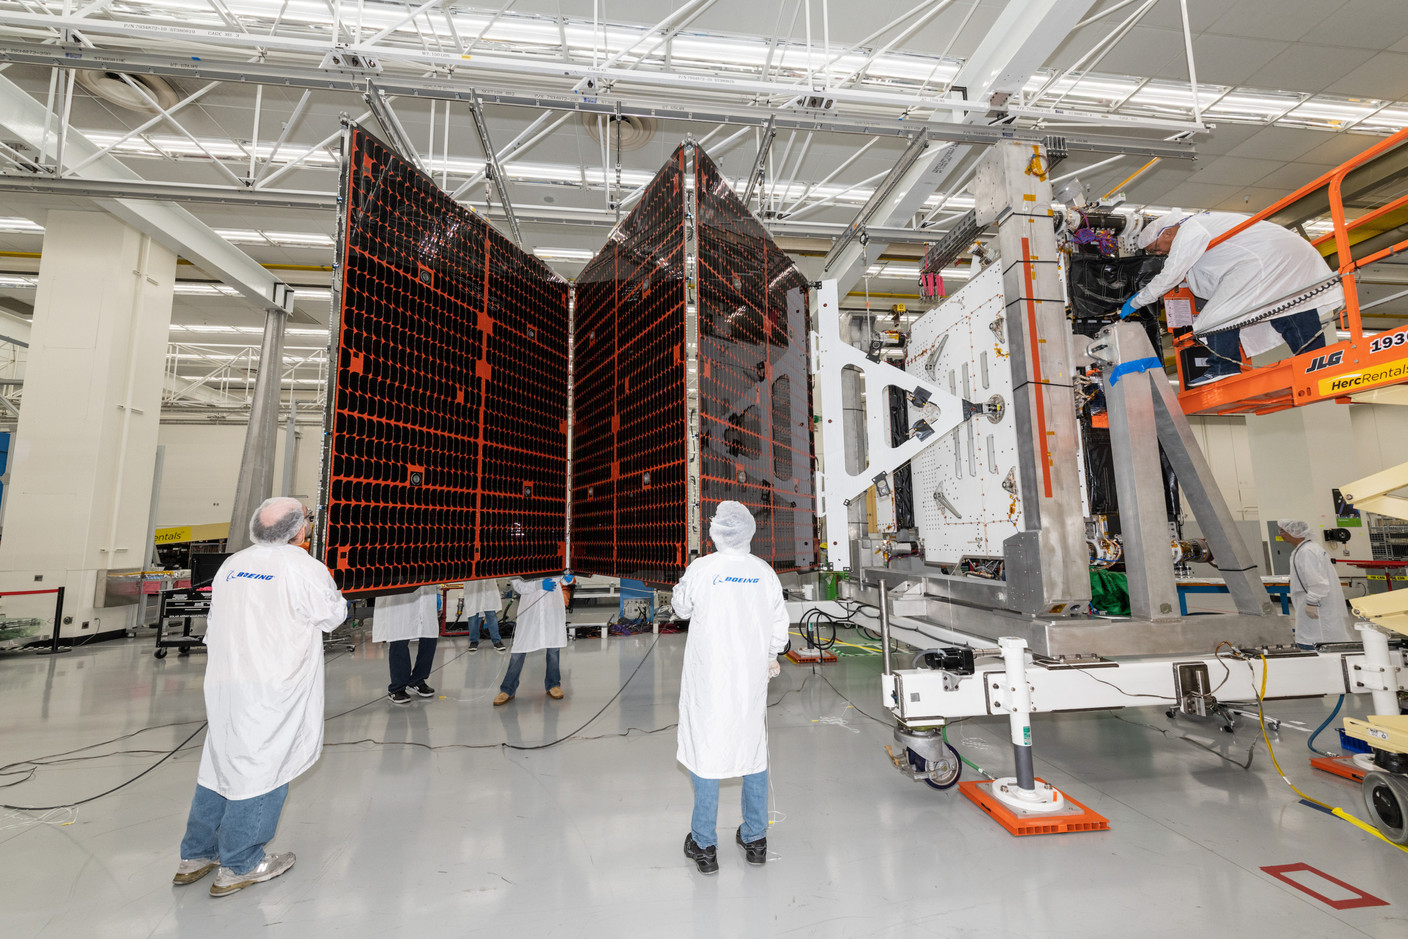 Among the most important elements of this electrically powered satellite are the custom-designed solar panels by Spectrolab, a subsidiary of Boeing, to withstand the high levels of radiation in medium Earth orbit.  (Photo: Boeing)